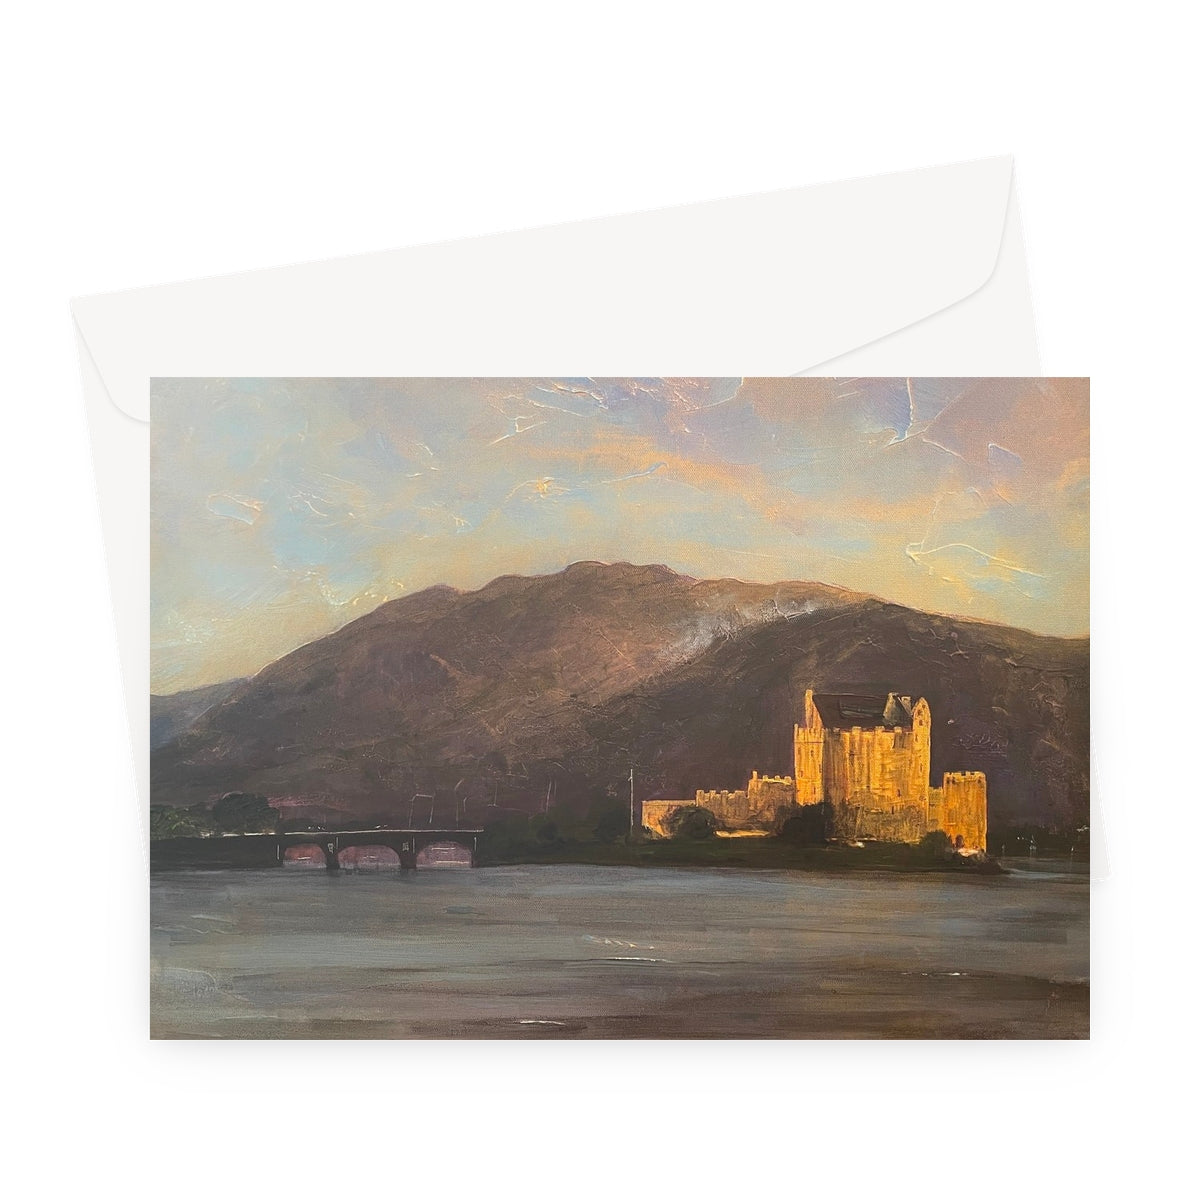 Eilean Donan Castle Art Gifts Greeting Card-Greetings Cards-Historic & Iconic Scotland Art Gallery-A5 Landscape-1 Card-Paintings, Prints, Homeware, Art Gifts From Scotland By Scottish Artist Kevin Hunter